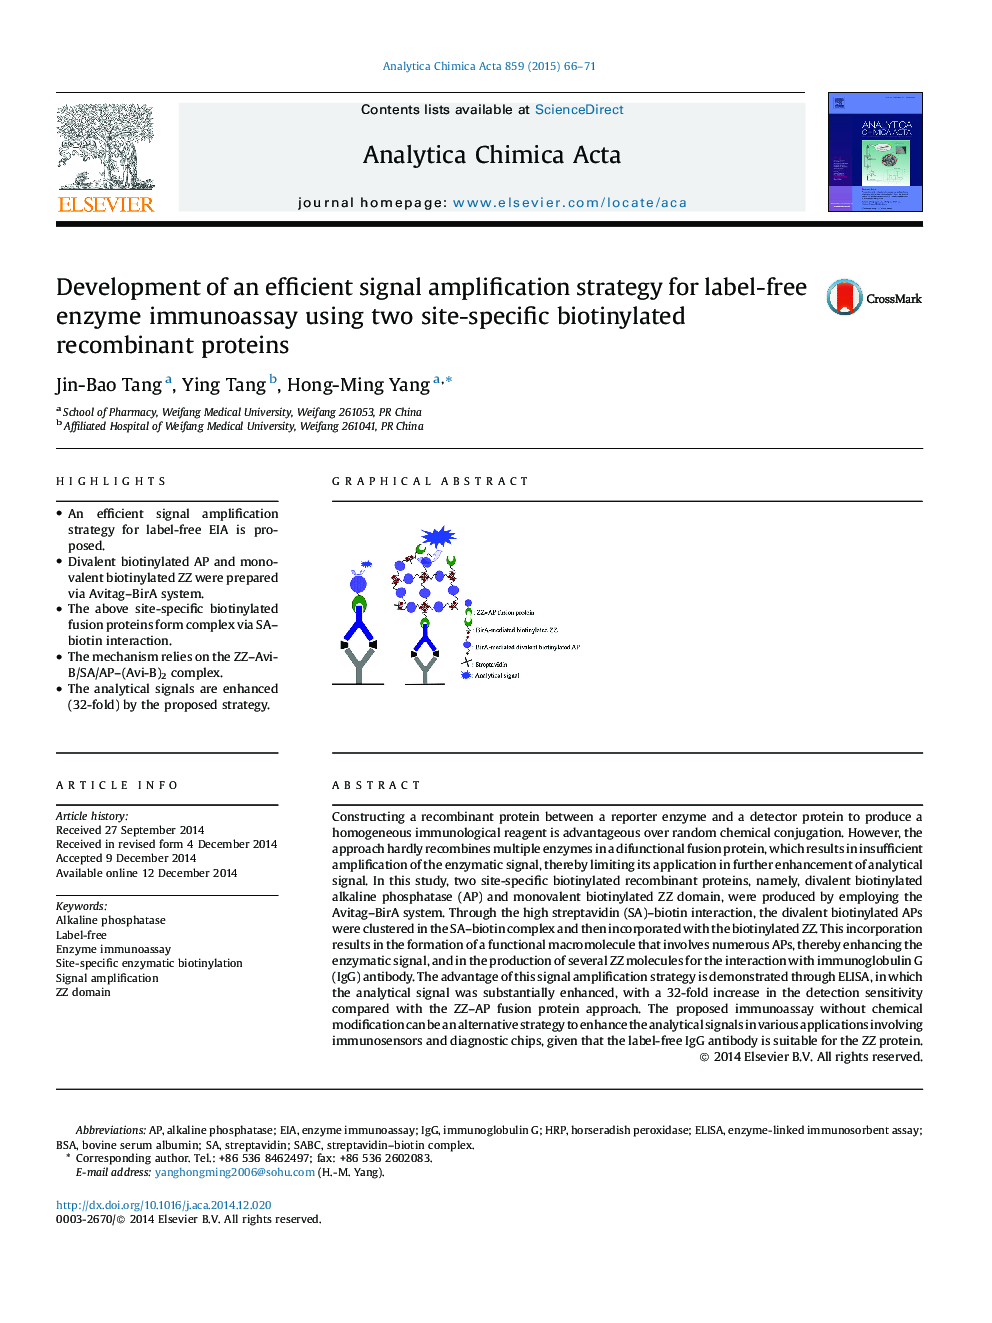 Development of an efficient signal amplification strategy for label-free enzyme immunoassay using two site-specific biotinylated recombinant proteins